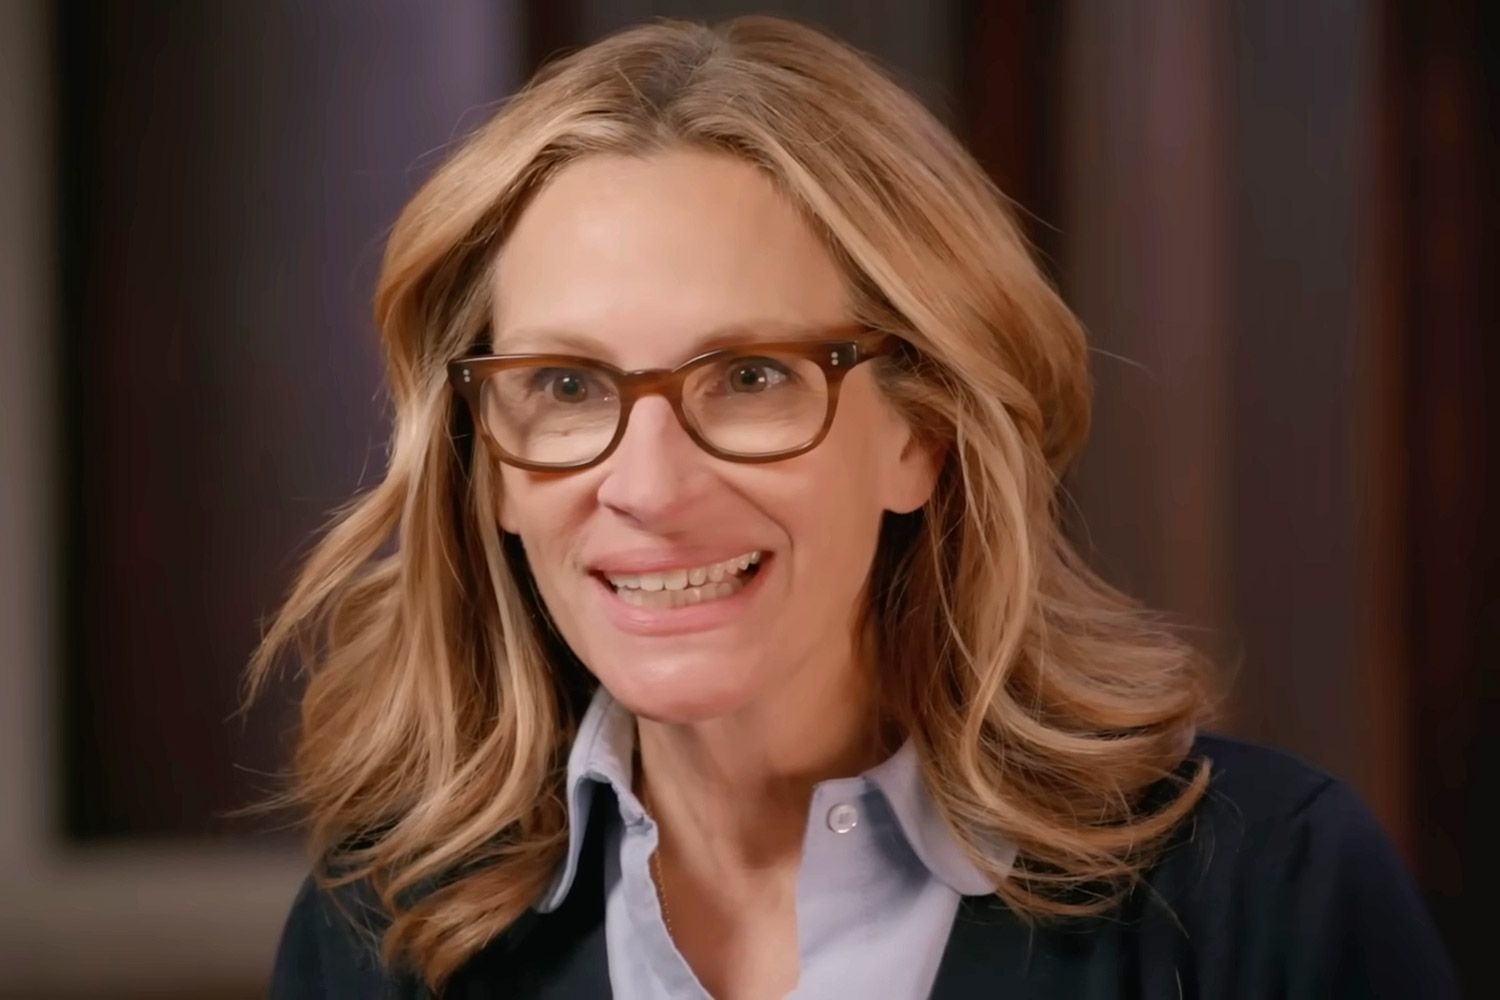 A screenshot from an interview with Julia Roberts, wearing glasses and a collared shirt, looking surprised